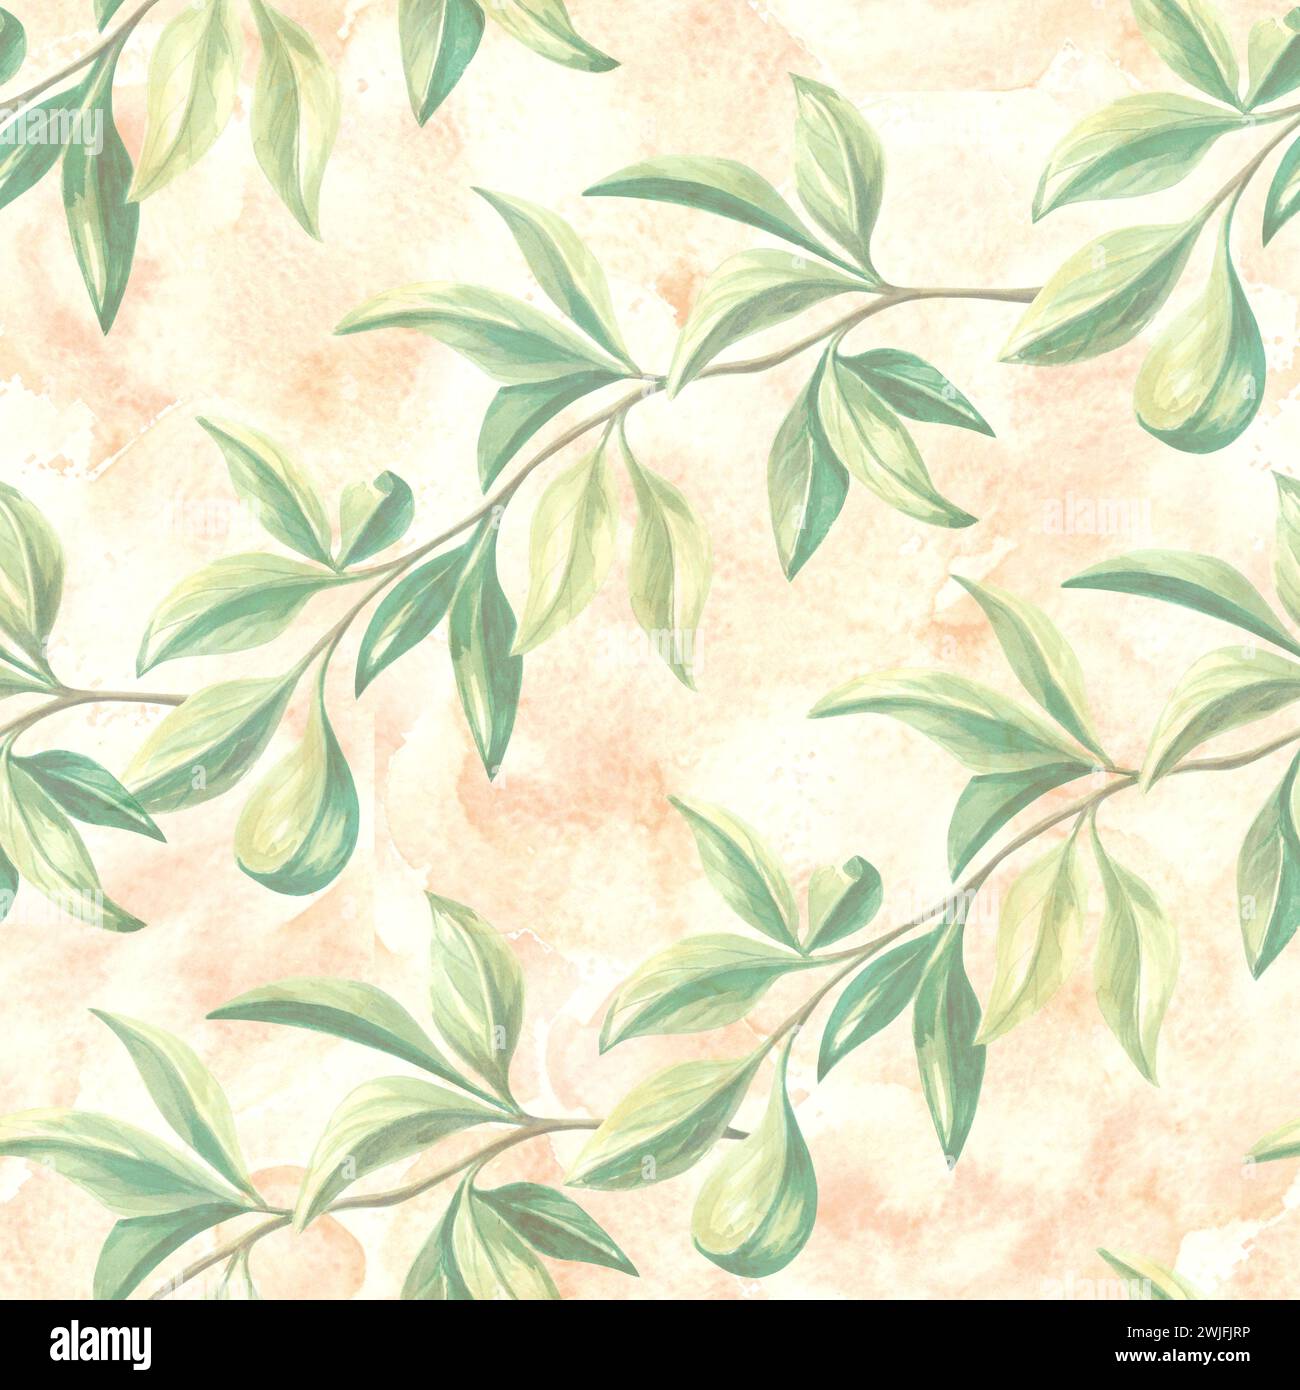 Seamless pattern with green leaves of oranges tree. Hand drawn watercolor botanical illustration of citrus branches. Background template with plants f Stock Photo